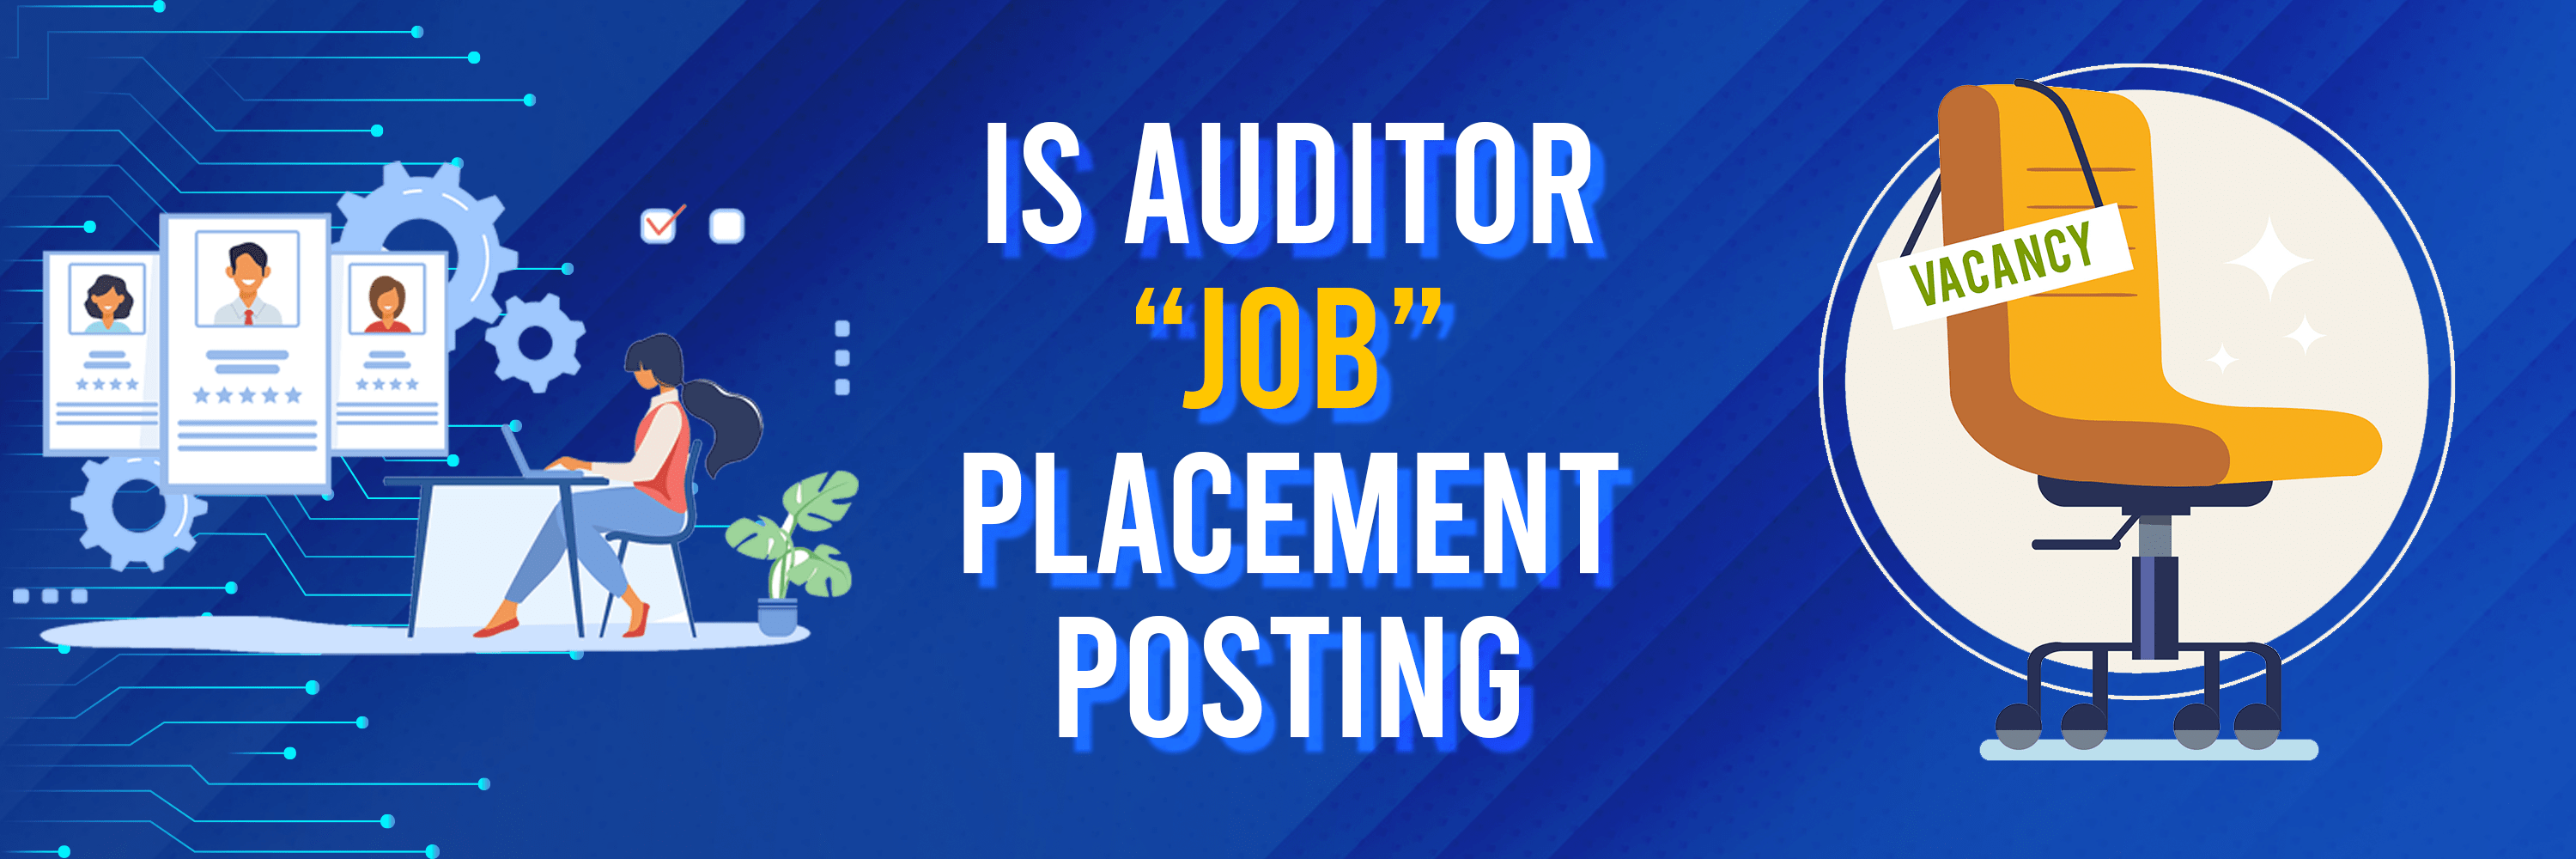 IS Auditor Job Placement Posting